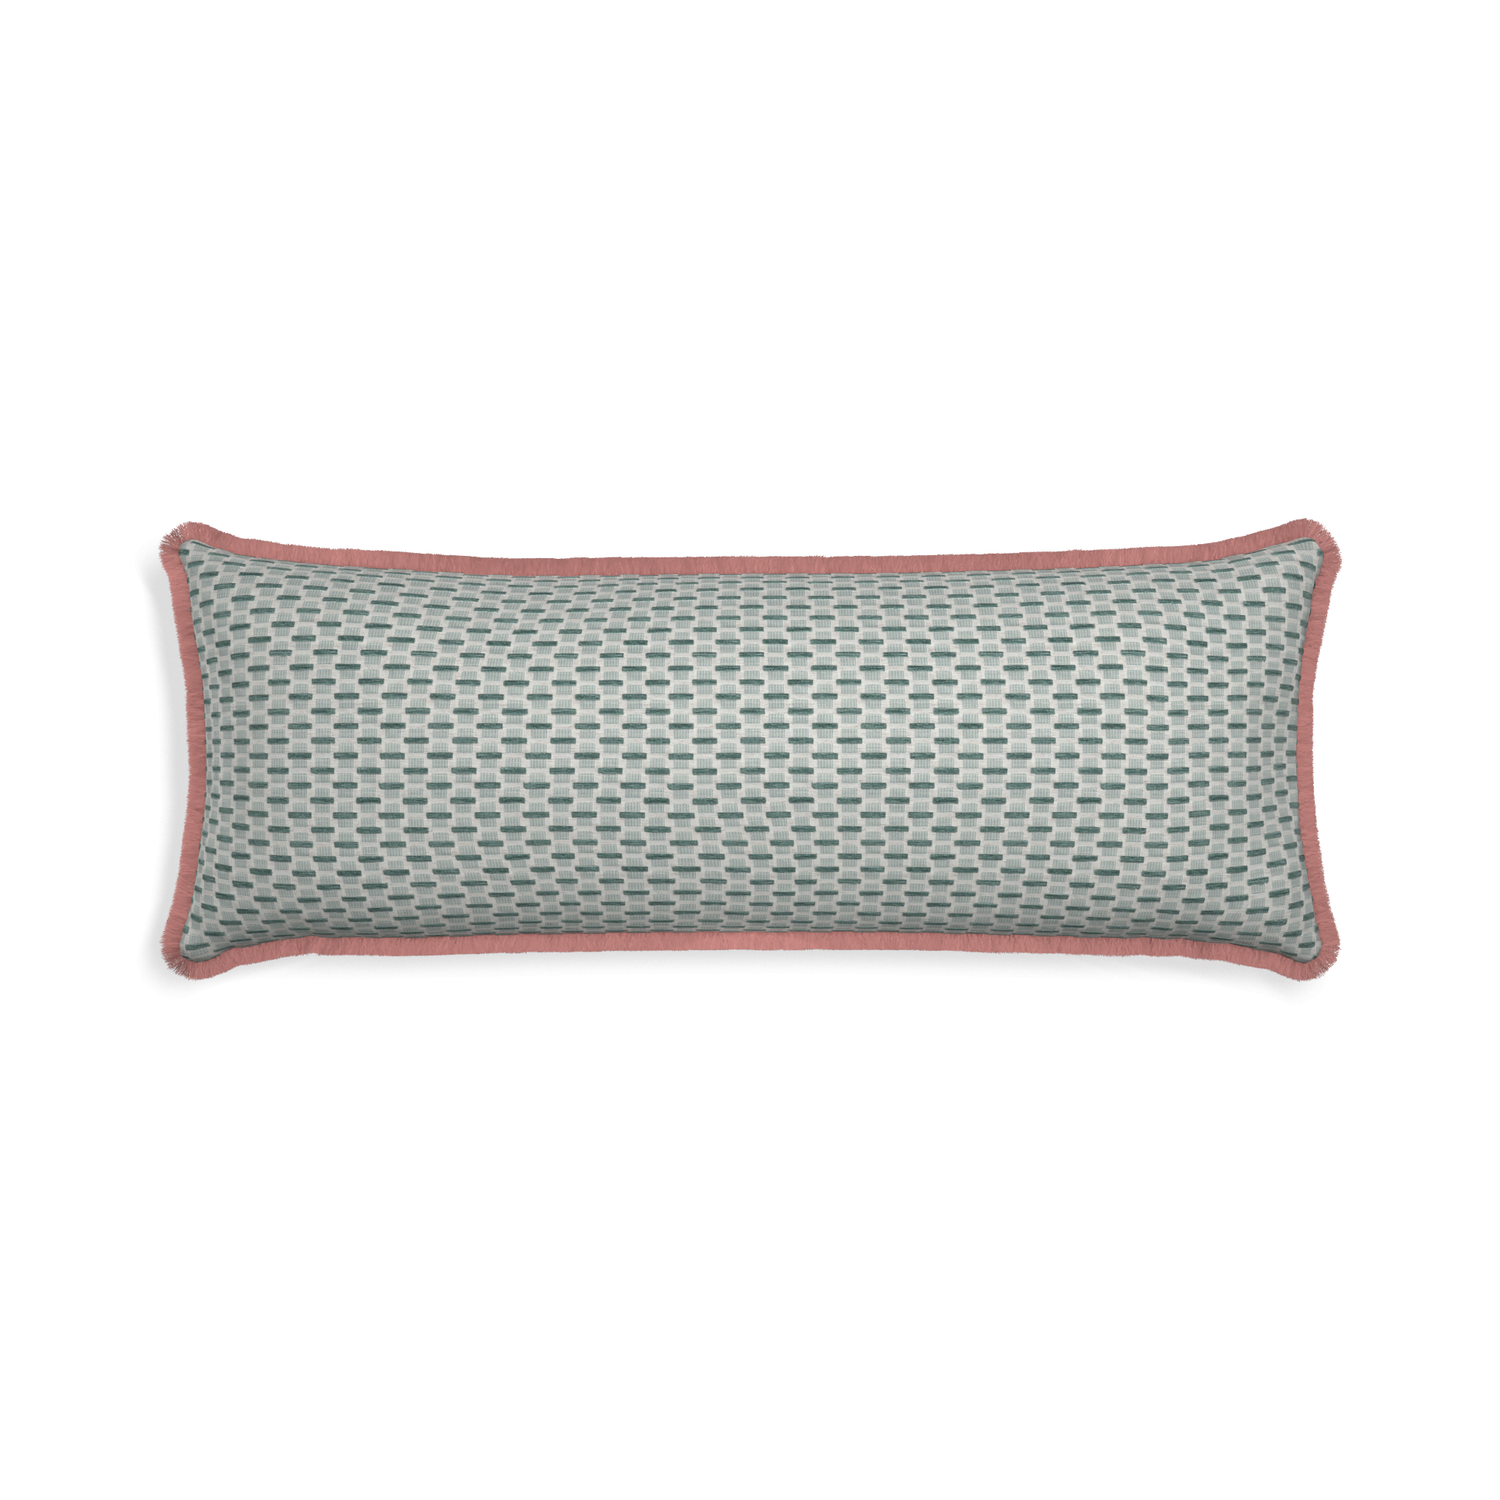 Xl-lumbar willow mint custom green geometric chenillepillow with d fringe on white background